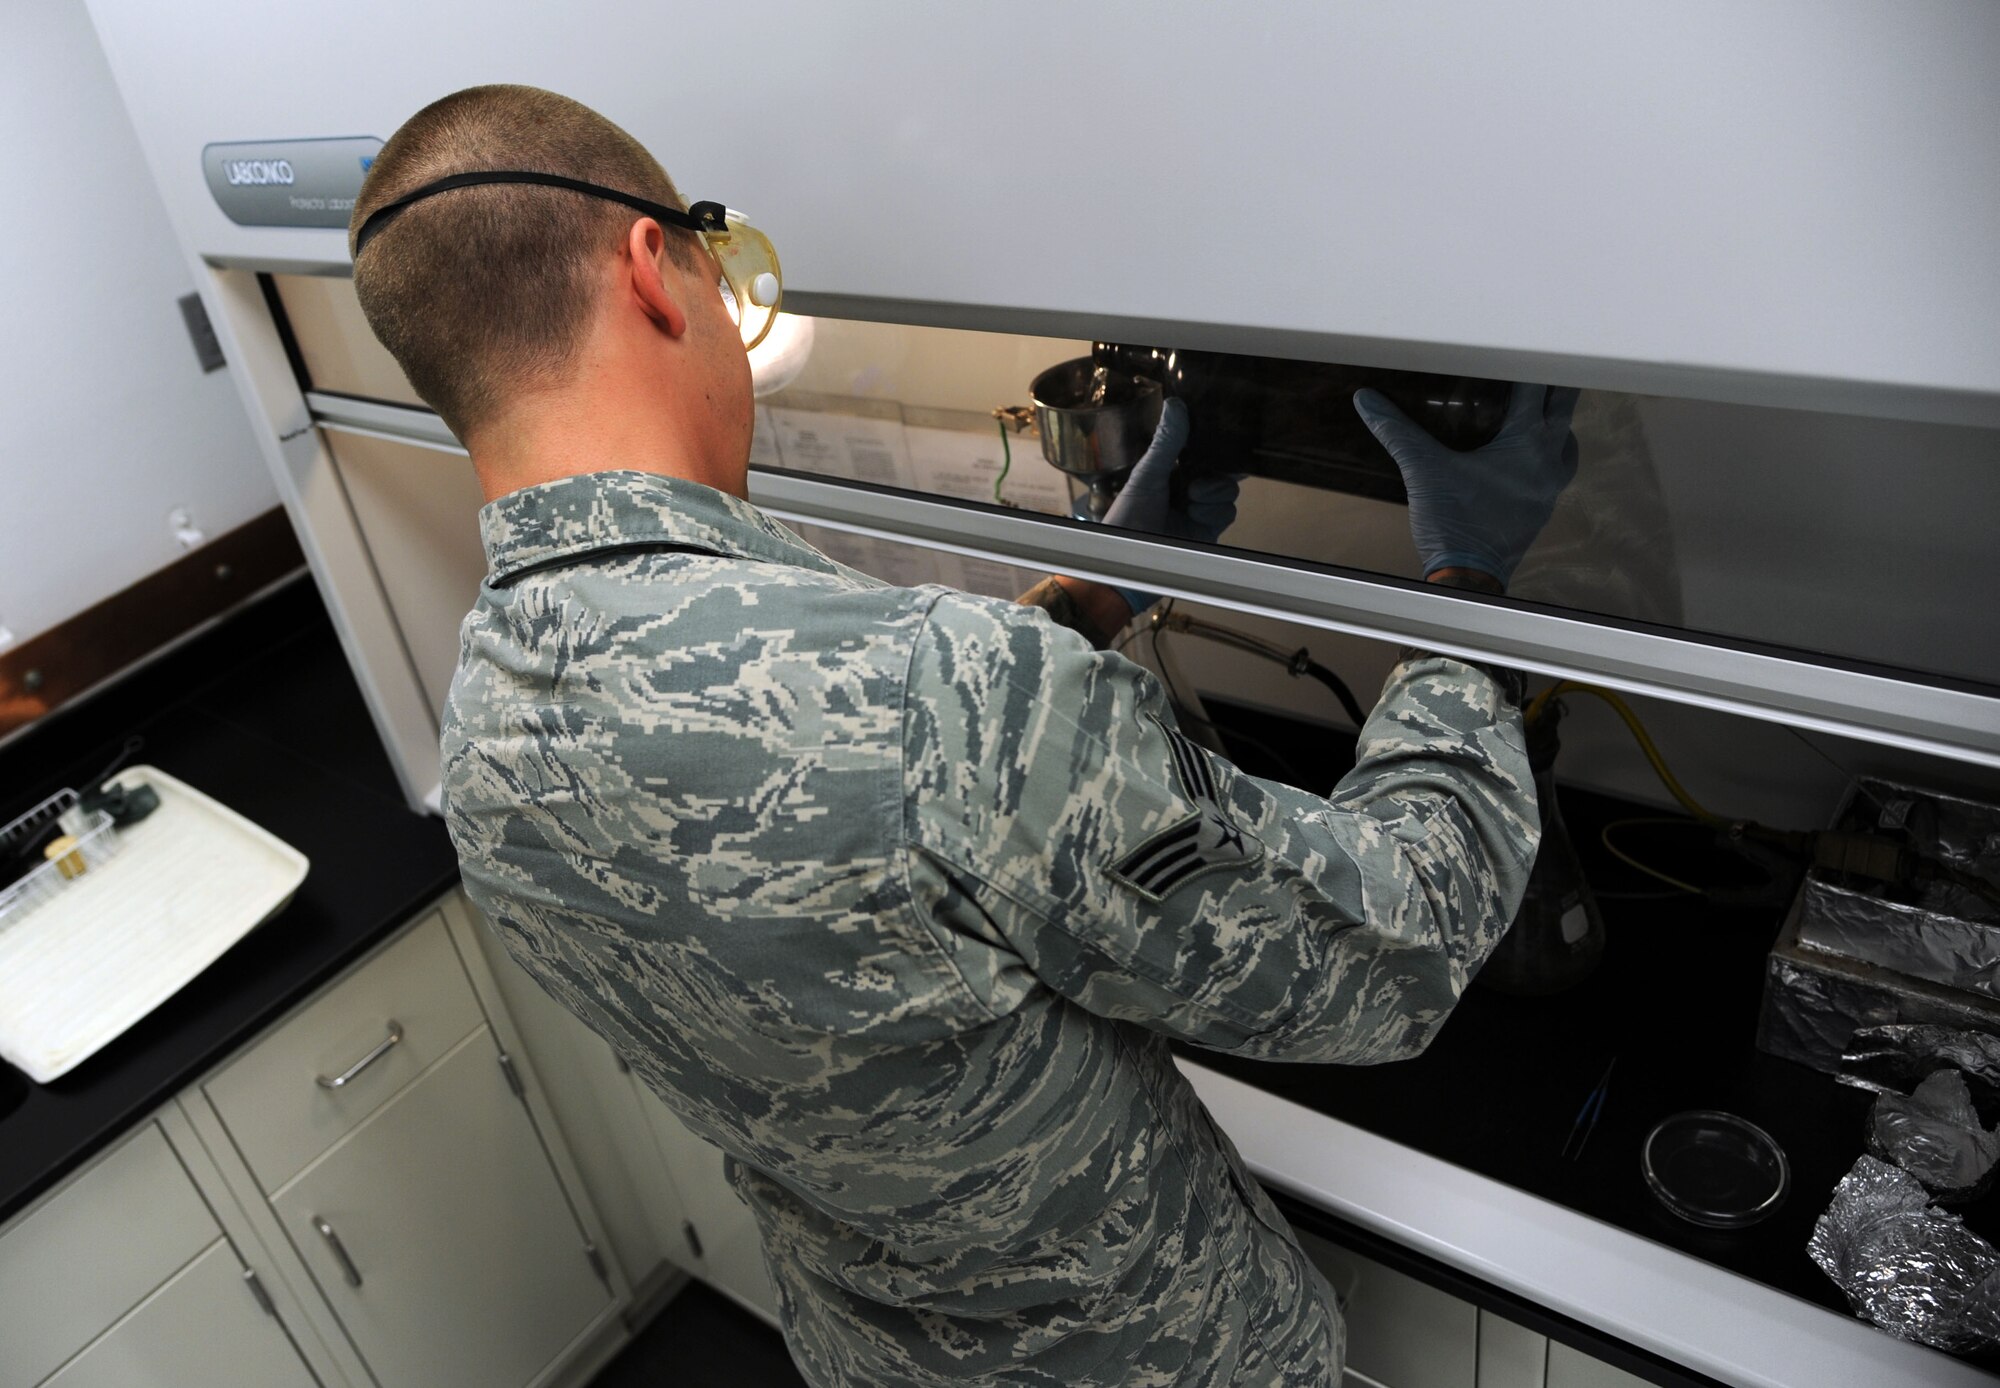 ALTUS AIR FORCE BASE, Okla. – U.S. Air Force Senior Airman Zakkary Wiest, 97th Logistics Readiness Squadron fuels apprentice, pours a fuel sample for testing Jan. 31, 2014. The samples undergo many tests to ensure that the fuel is clean, dry and useable by the aircraft. (U.S. Air Force photo by Airman 1st Class J. Zuriel Lee/Released)